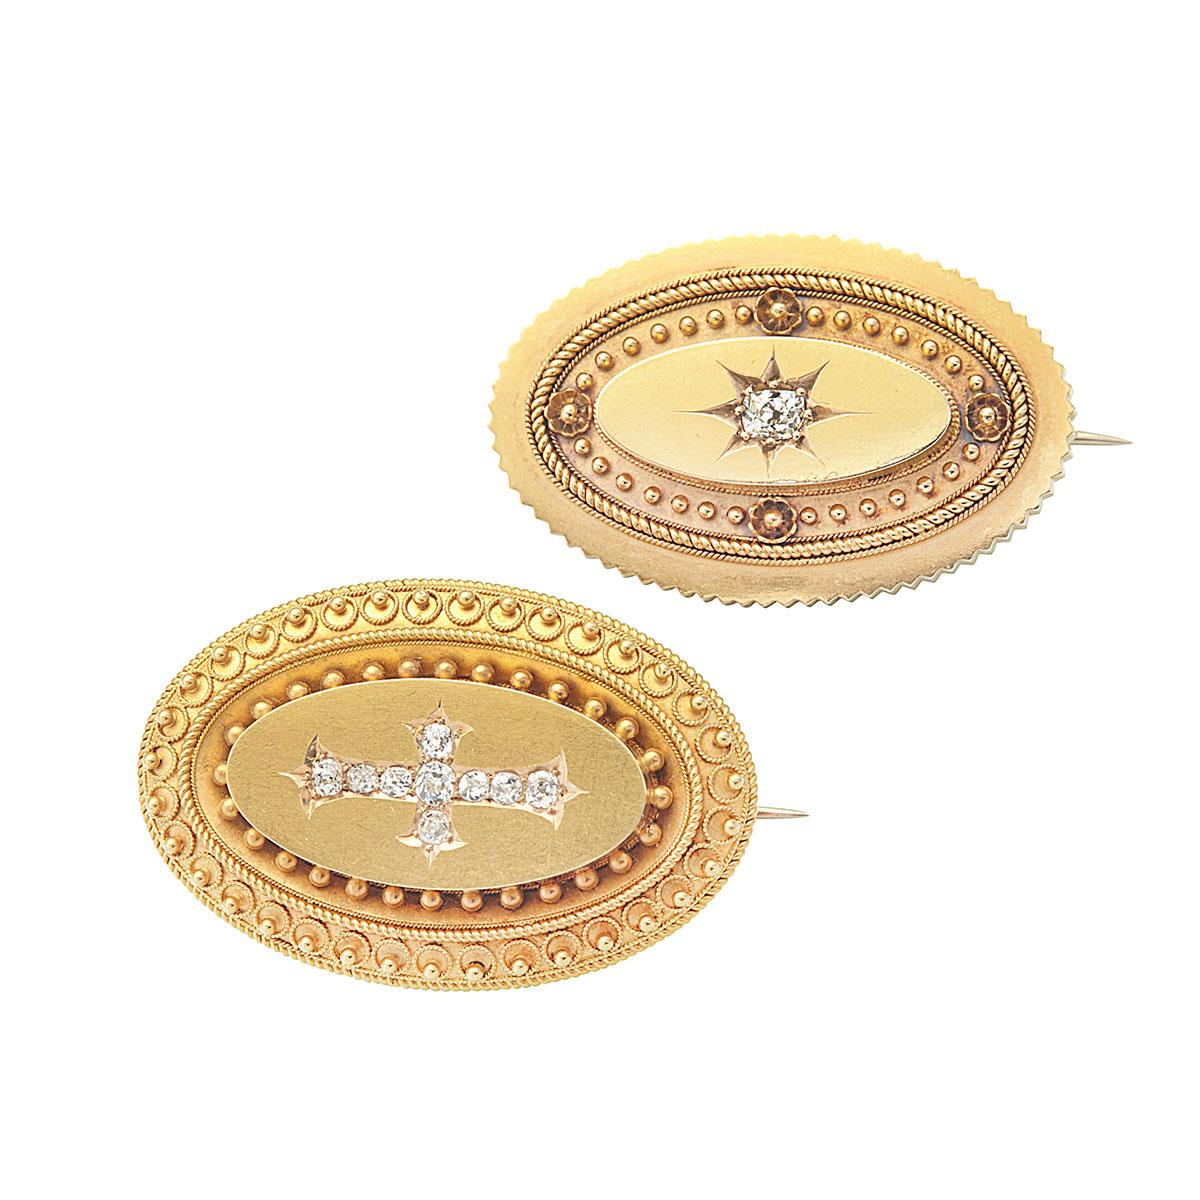 Two 19th Century English 15k Yellow Gold Oval Brooches